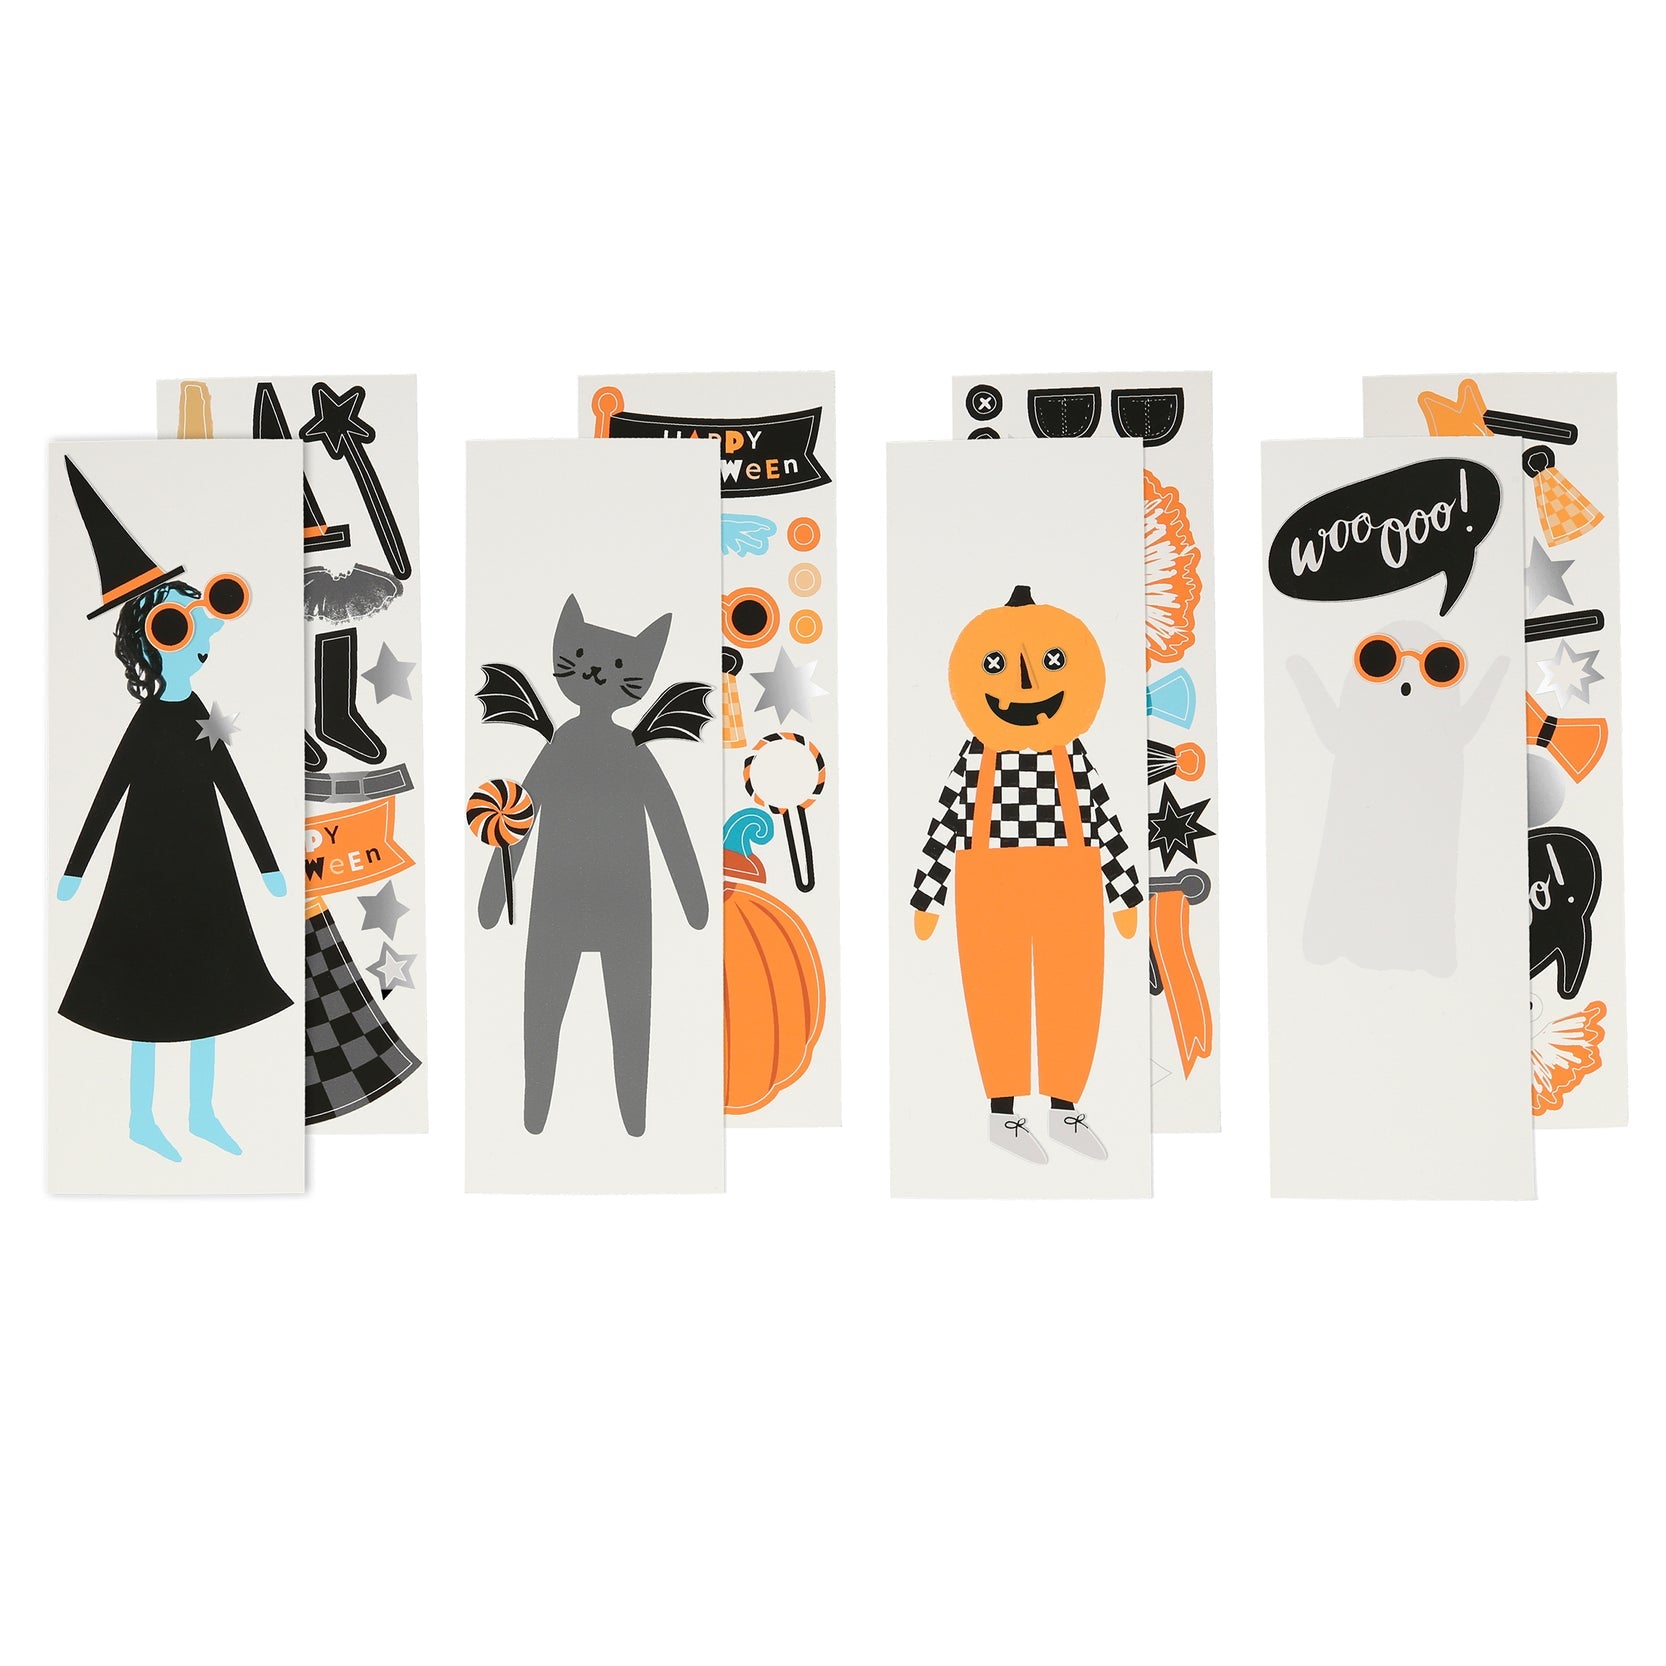 Paper doll characters in the same styles as the crackers. 